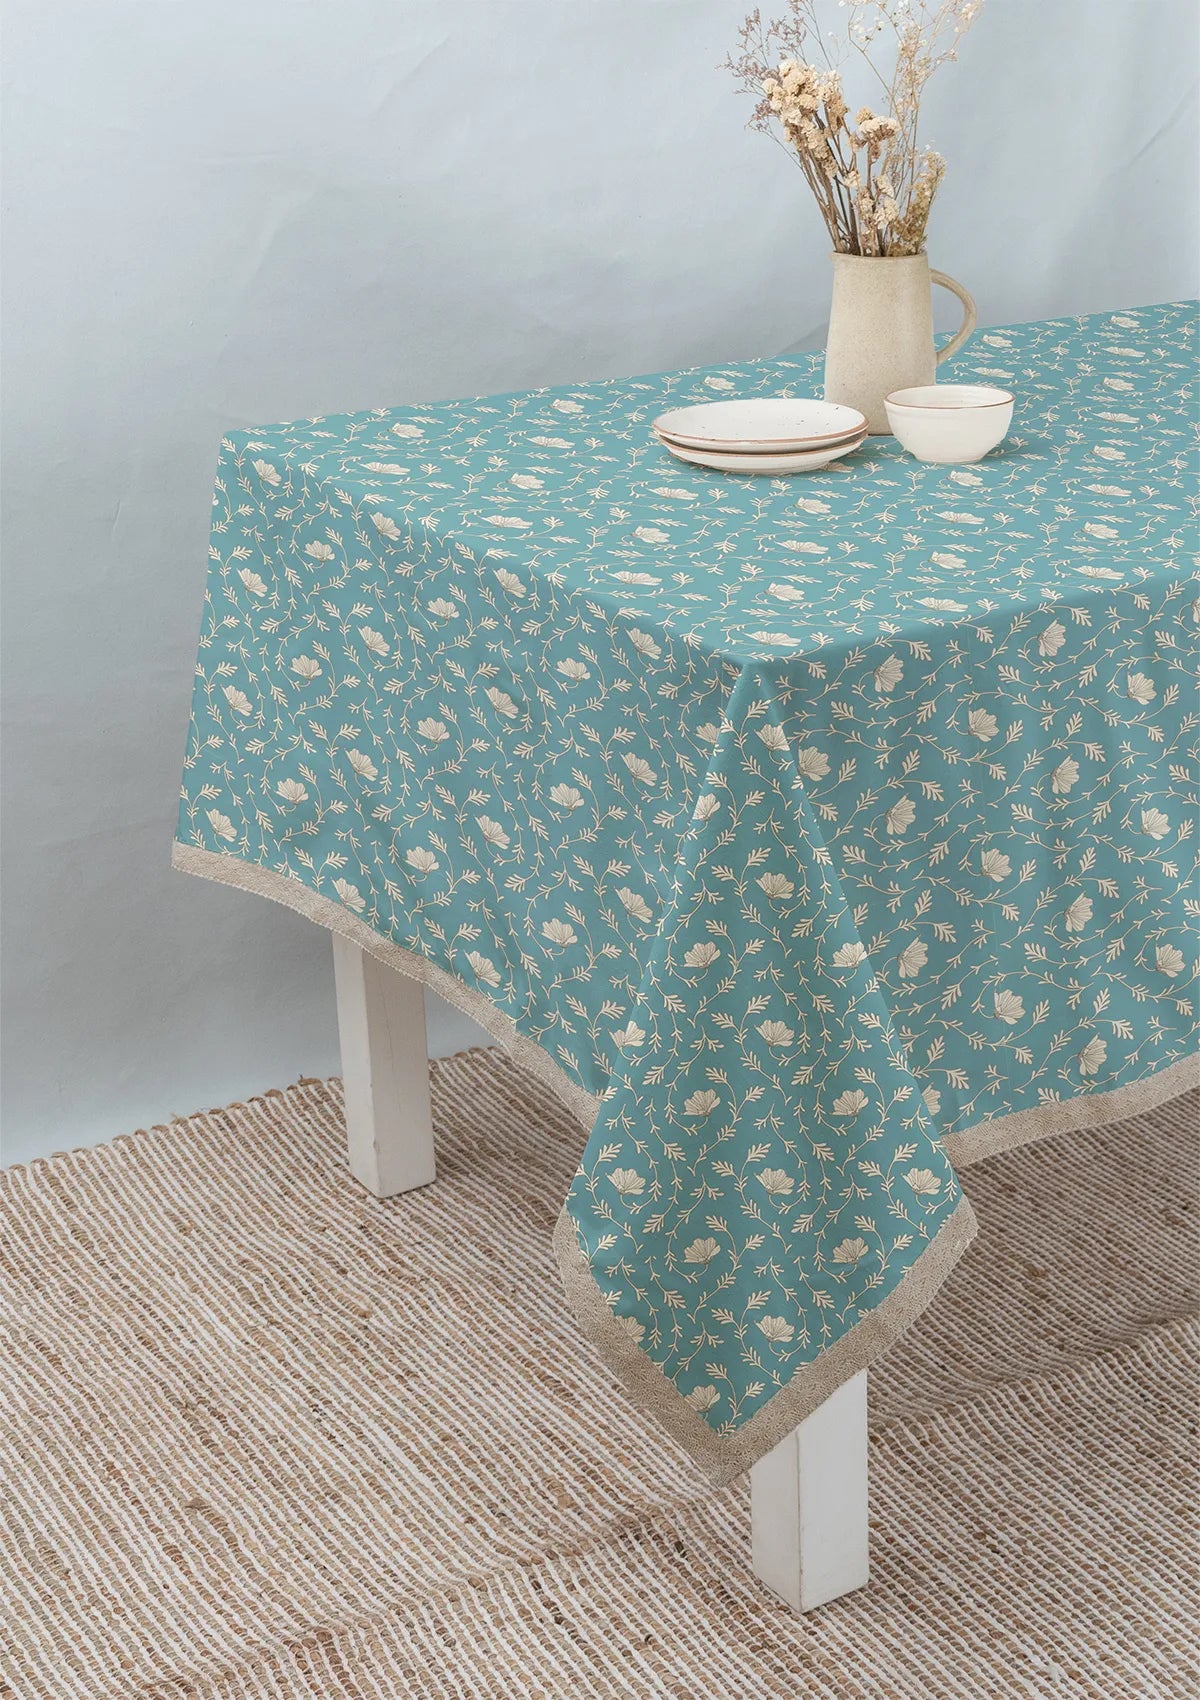 Eden aqua blue 100% cotton floral table cloth for 4 seater or 6 seater dining with lace border